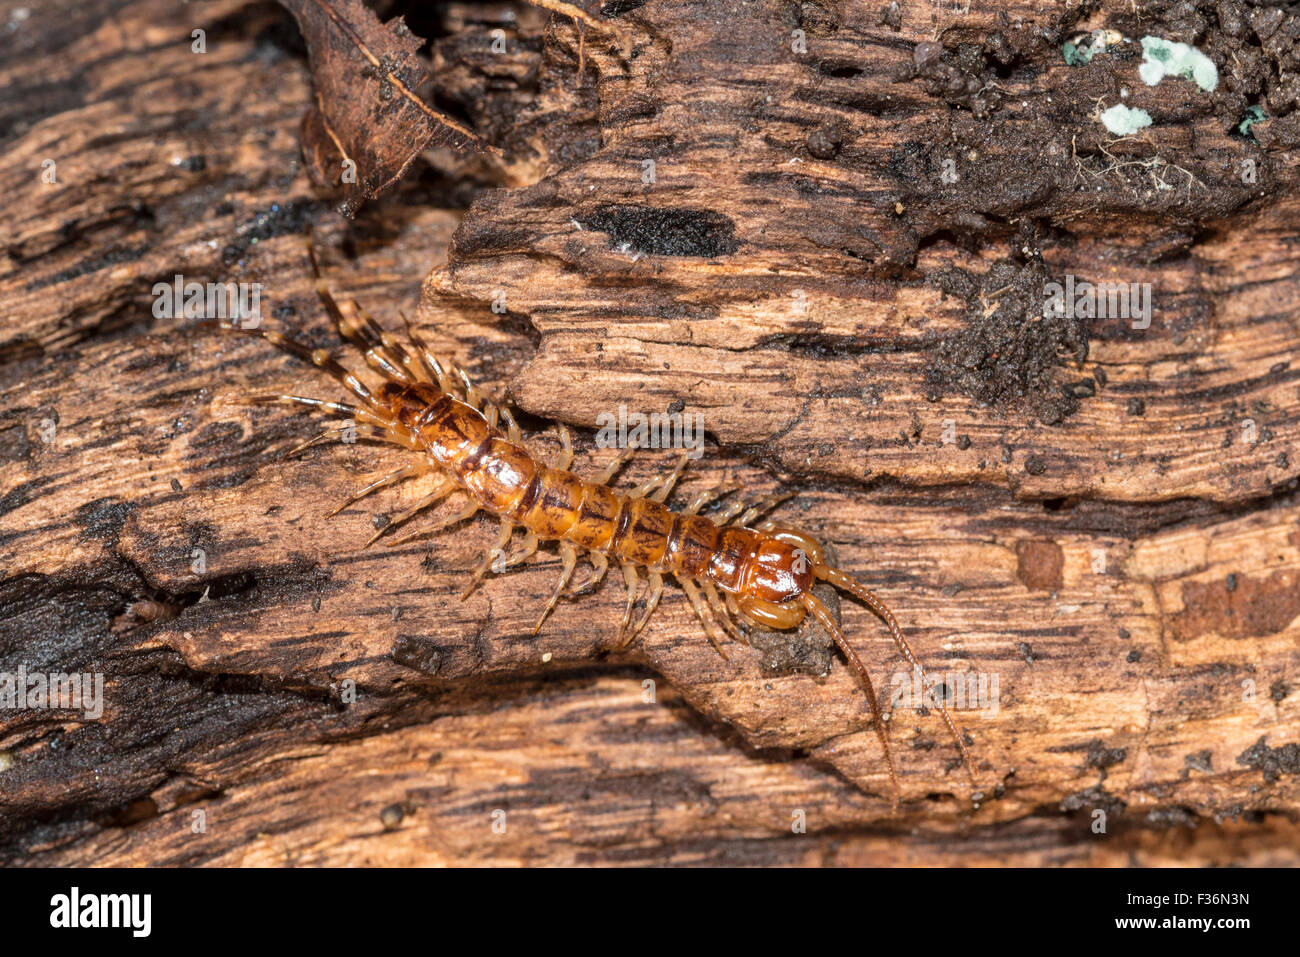 A shot of a centipede found under a log in Pulborough, West Sussex lit using the on camera flash Stock Photo